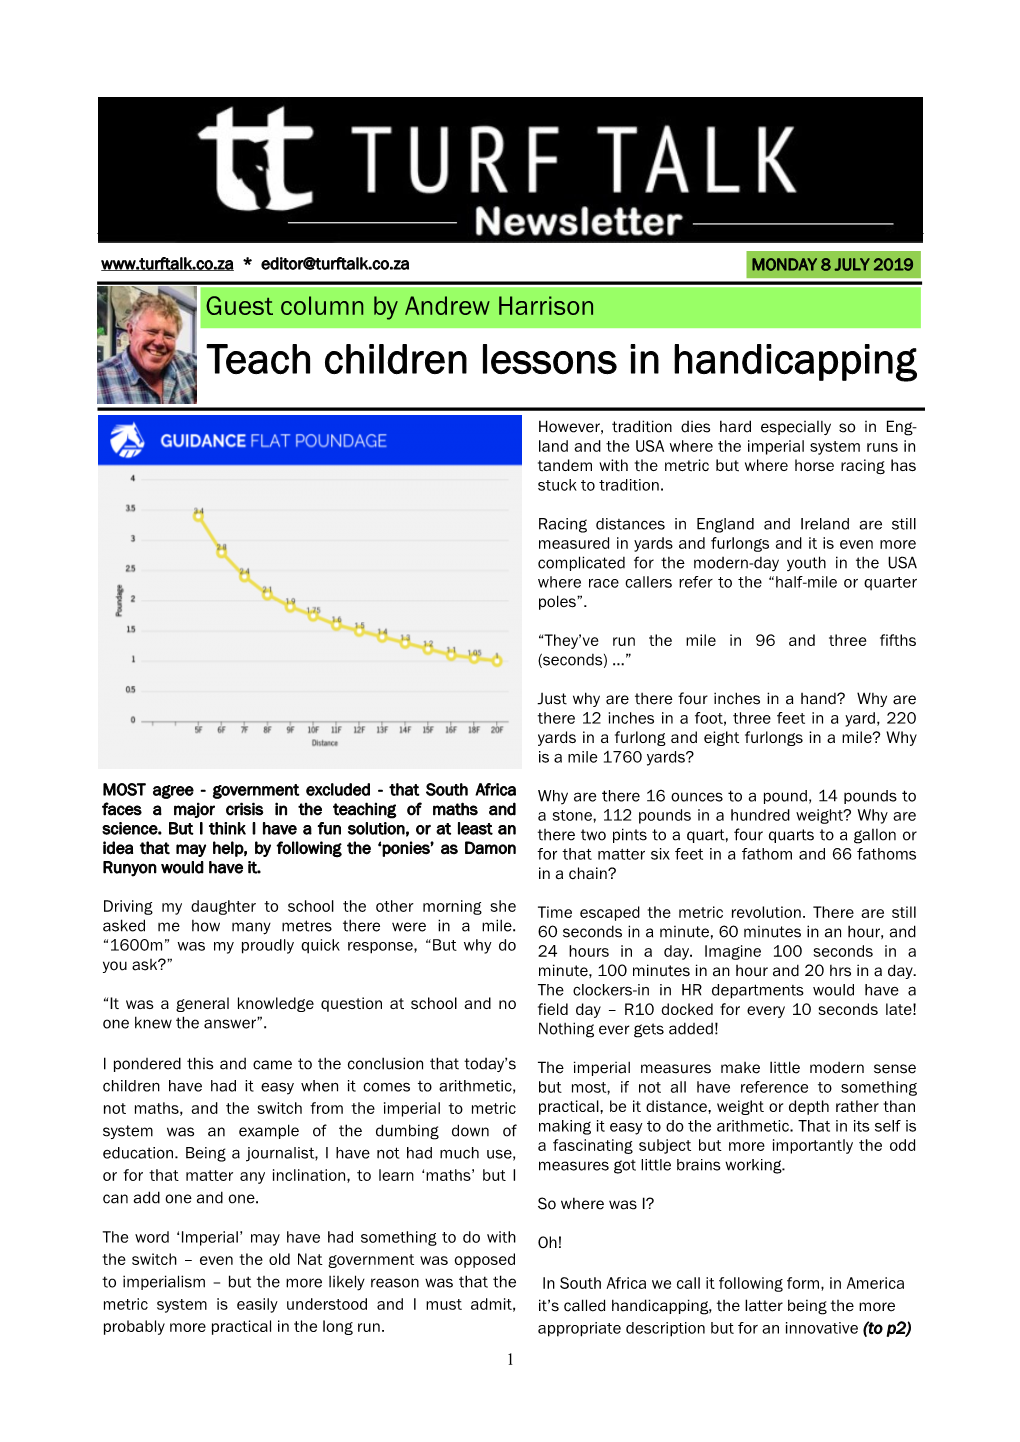 Teach Children Lessons in Handicapping